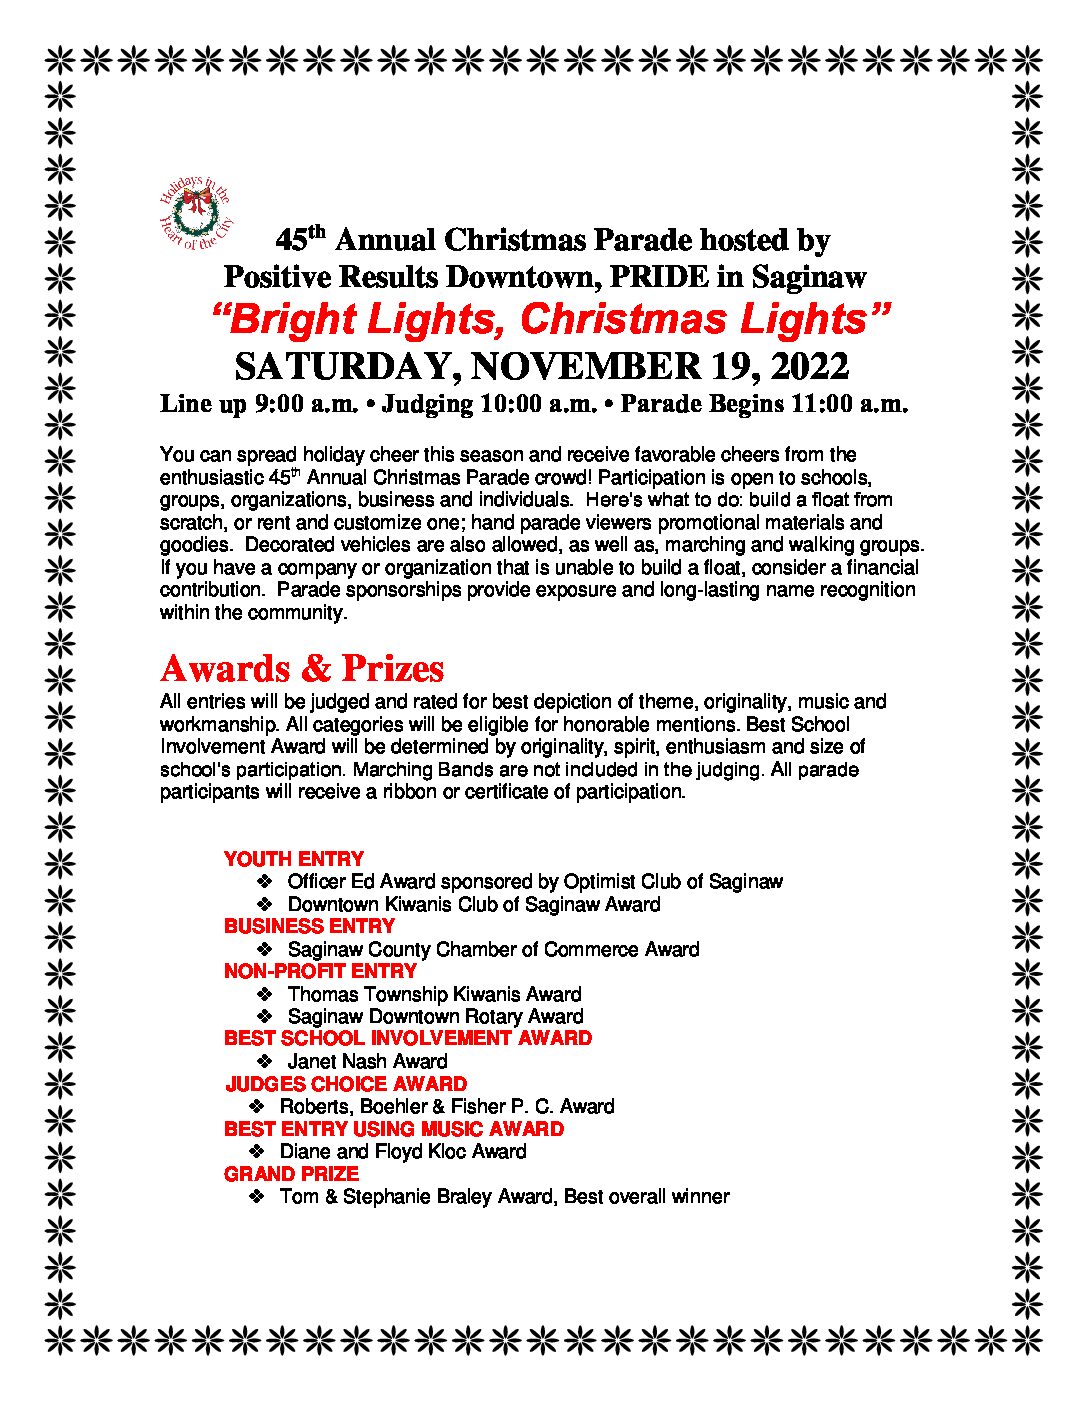 <h1 class="tribe-events-single-event-title">“Bright Lights, Christmas Lights” -45th Annual Christmas Parade</h1>